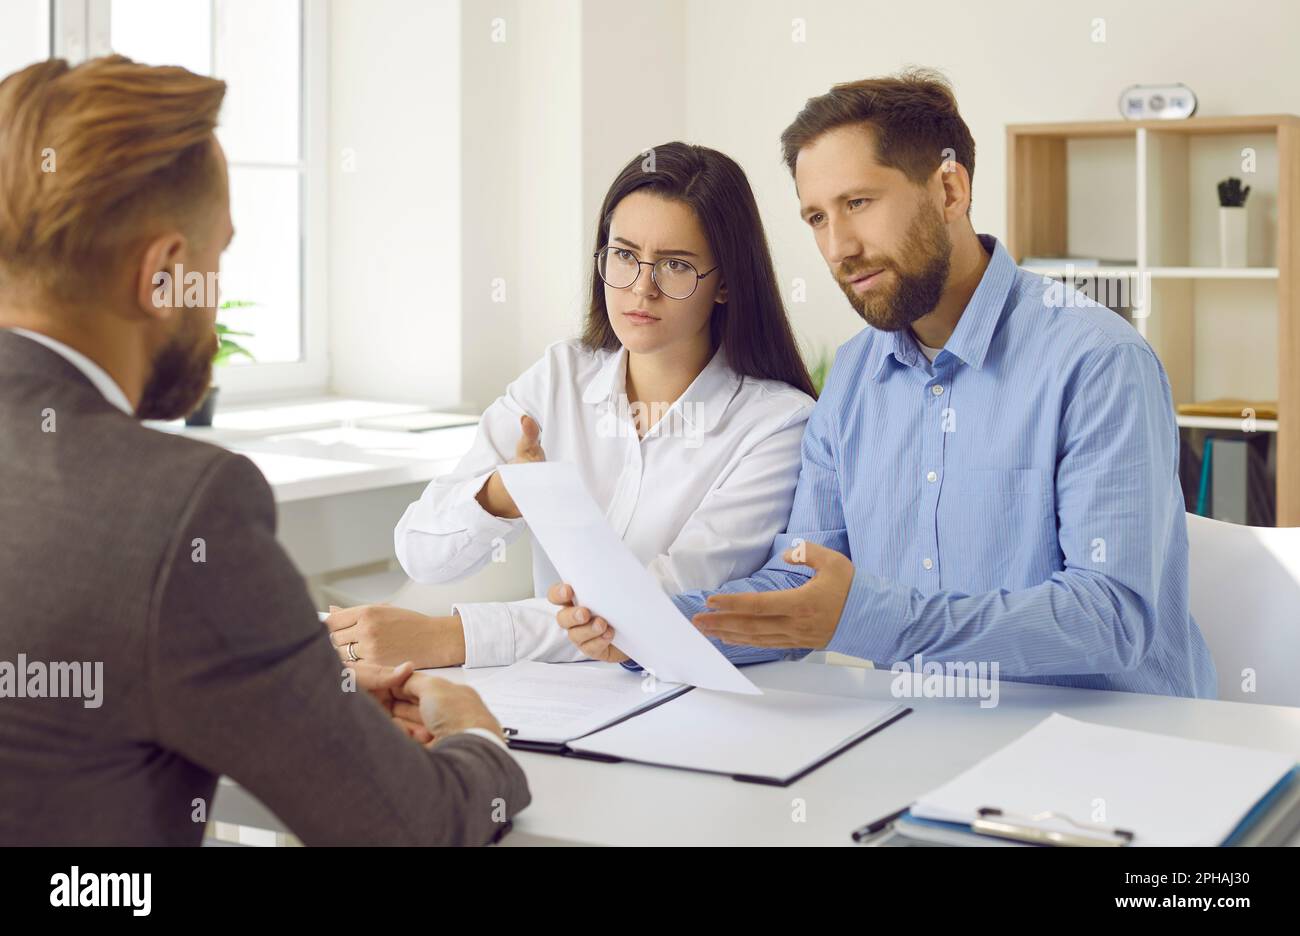 Angry clients having misunderstanding while talking about business contract with manager Stock Photo